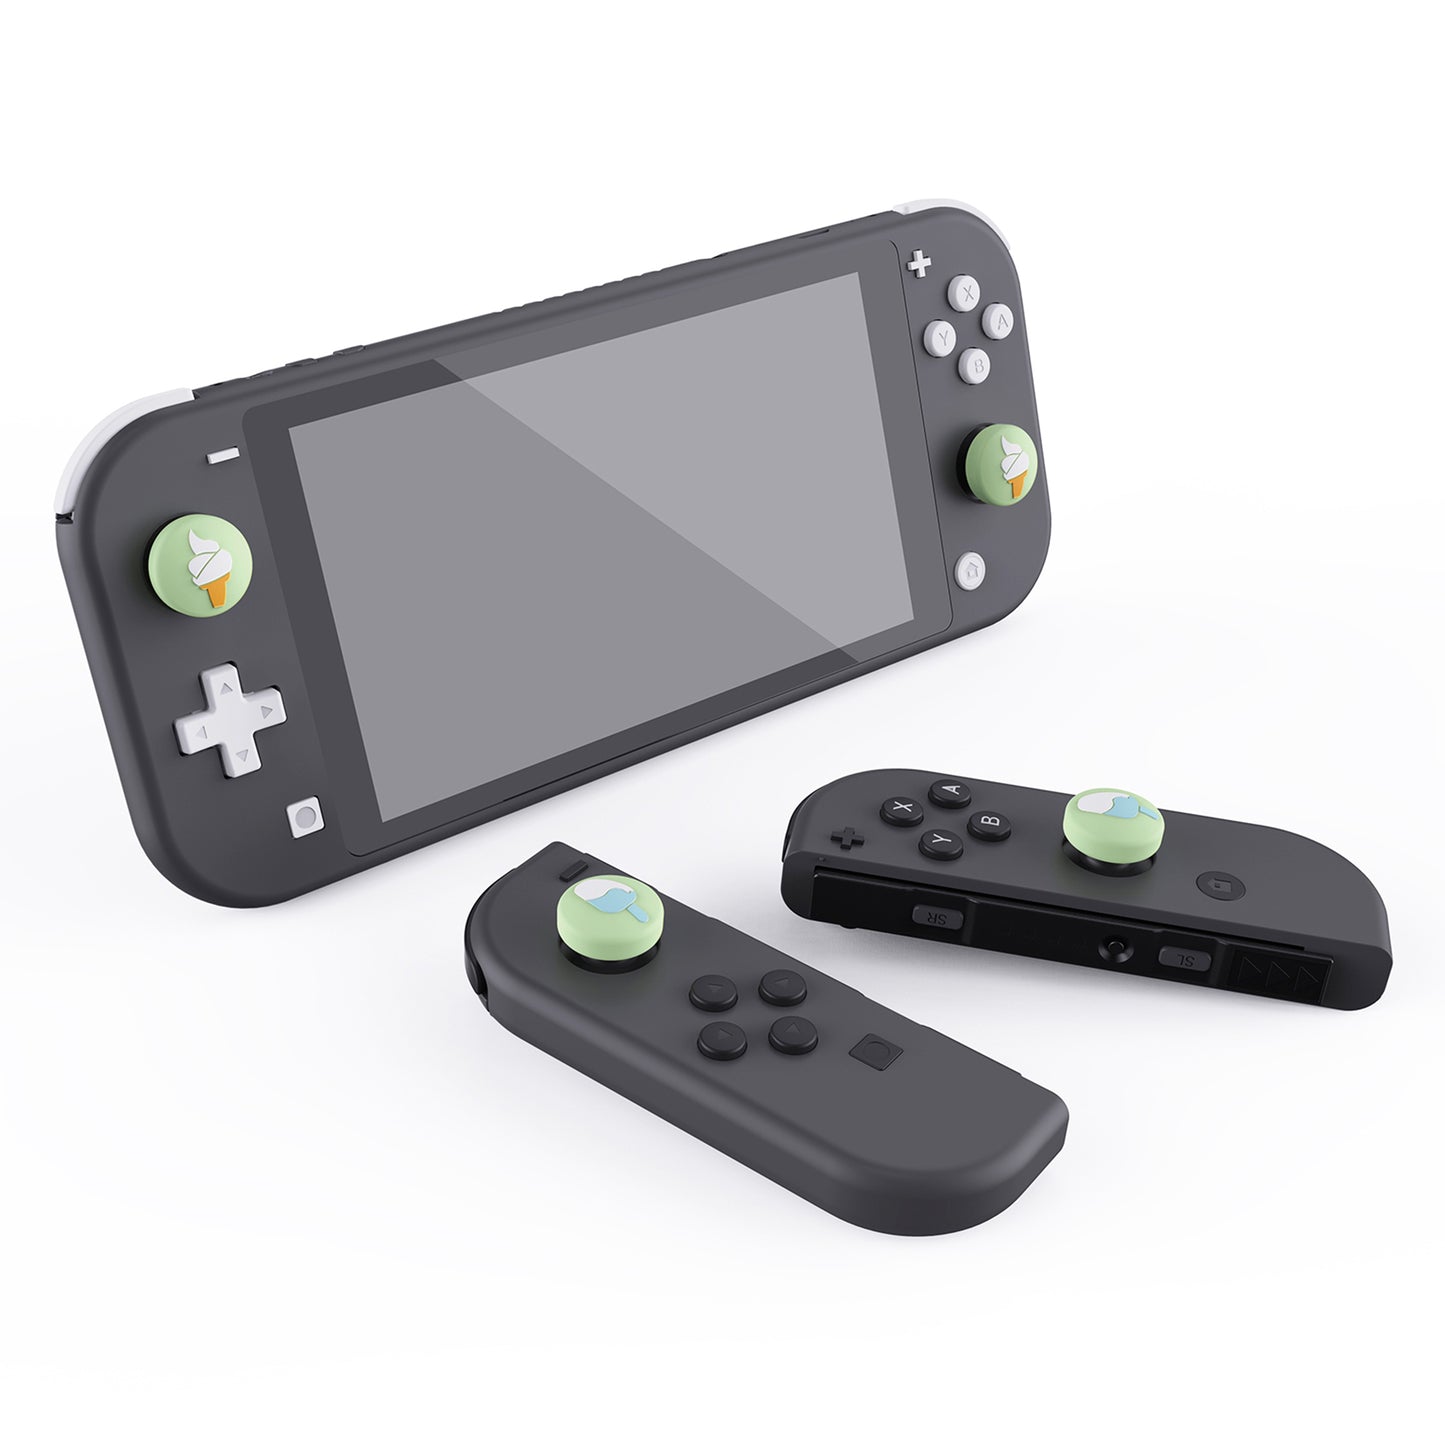 PlayVital Ice Cream Cute Switch Thumb Grip Caps, Joystick Caps for Nintendo Switch Lite, Silicone Analog Cover Thumbstick Grips for Switch OLED Joycon - Matcha Green - NJM1108 playvital